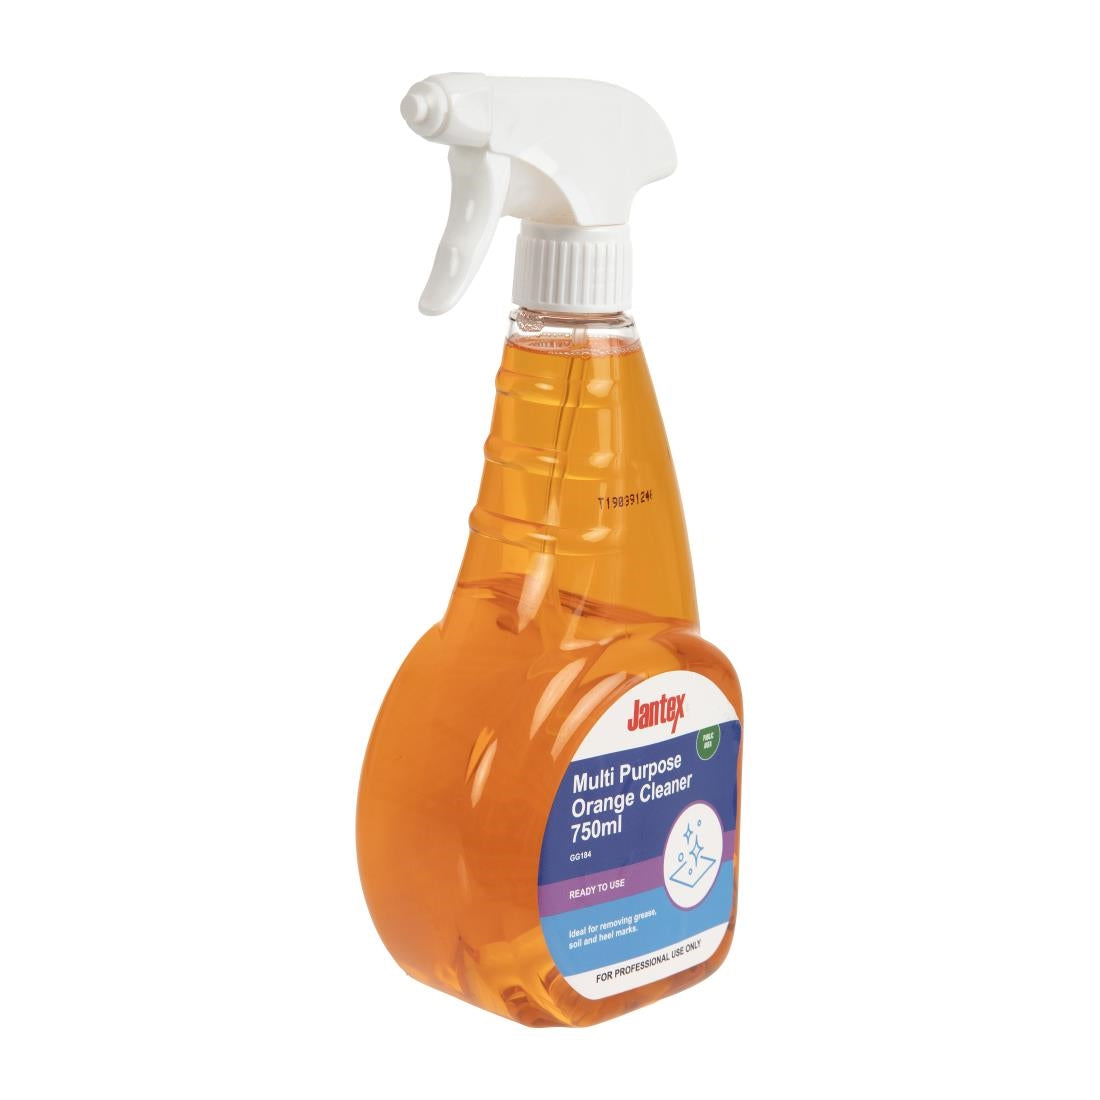 Jantex Citrus Multi-Purpose Cleaner Ready To Use 750ml (Single Pack) JD Catering Equipment Solutions Ltd